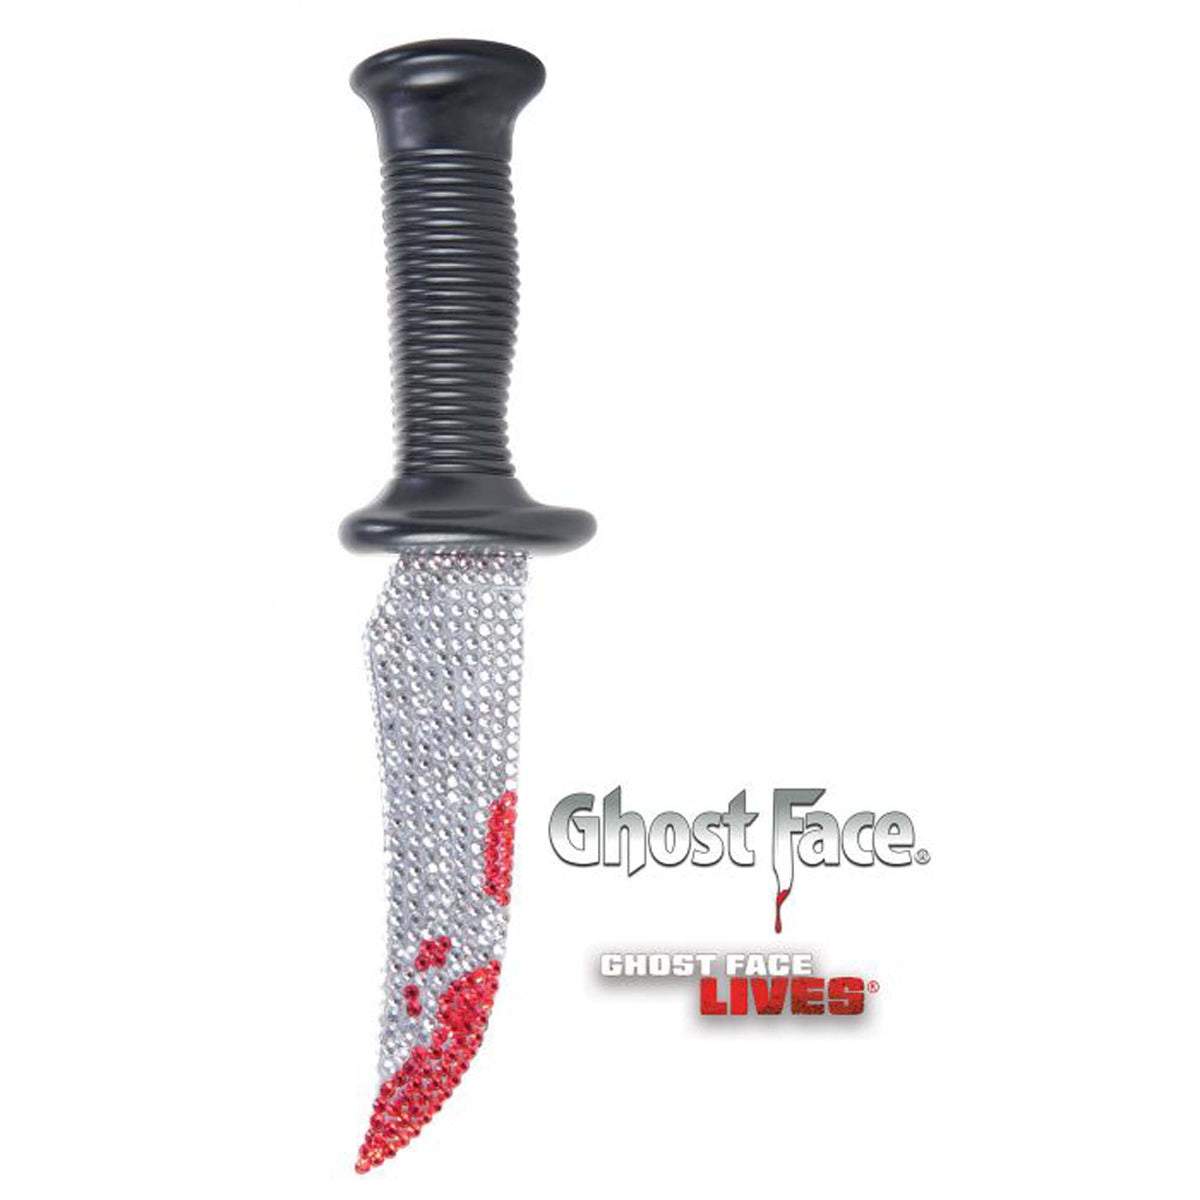 FUN WORLD Costume Accessories Ghost Face Bling Knife